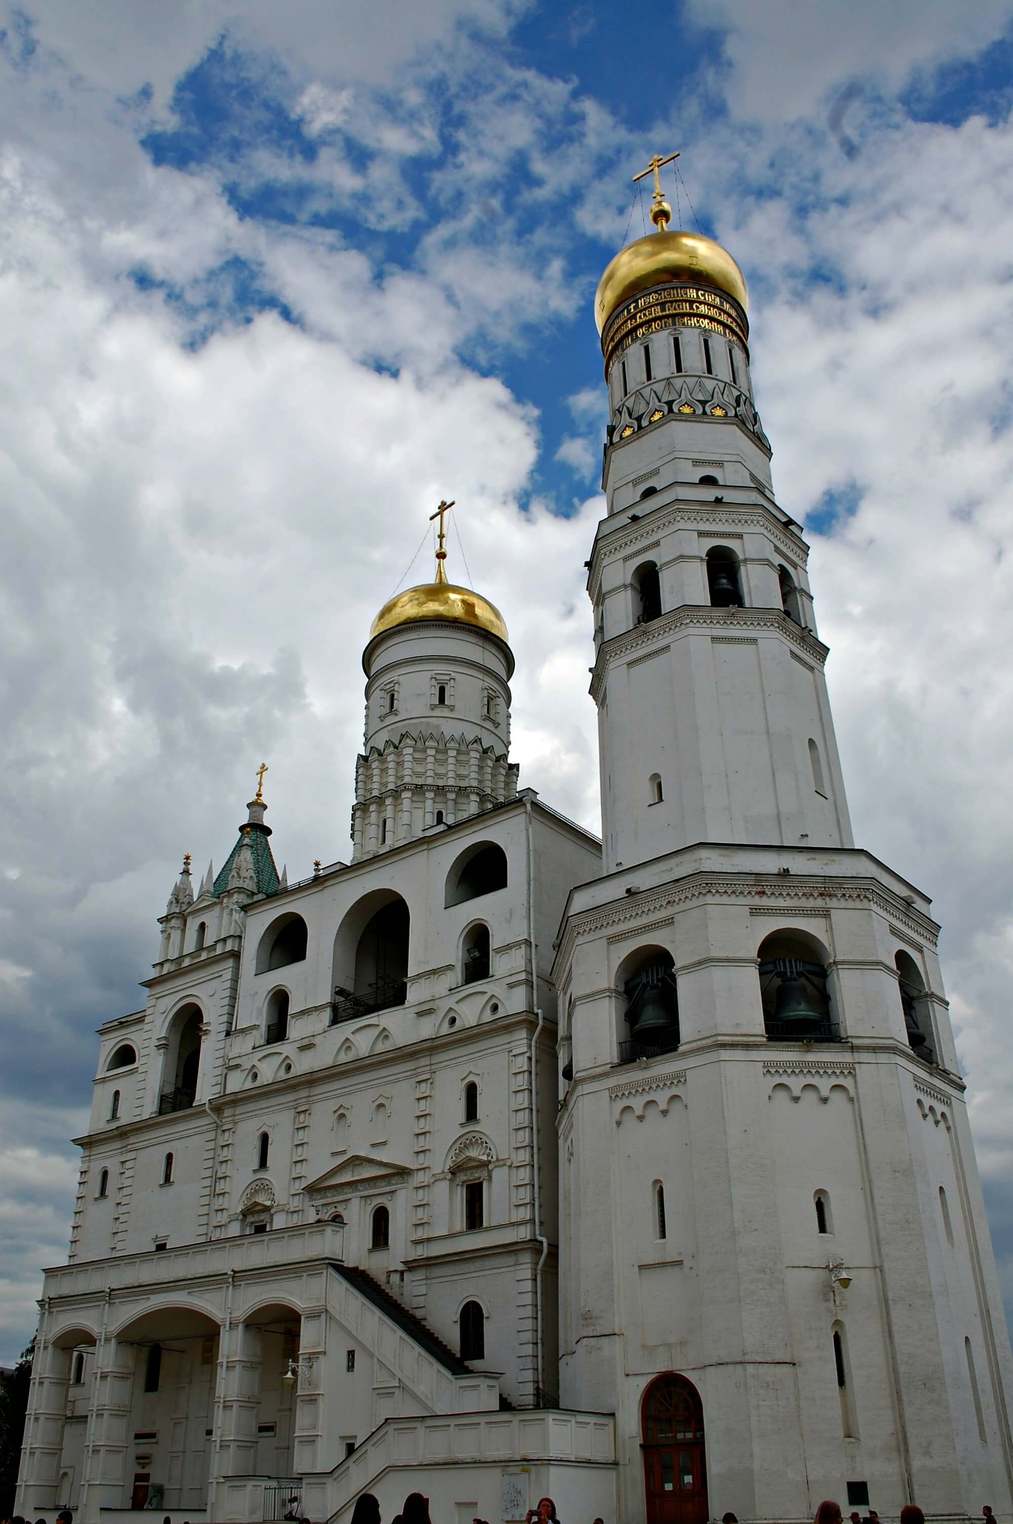 The Ivan the Great Bell Tower